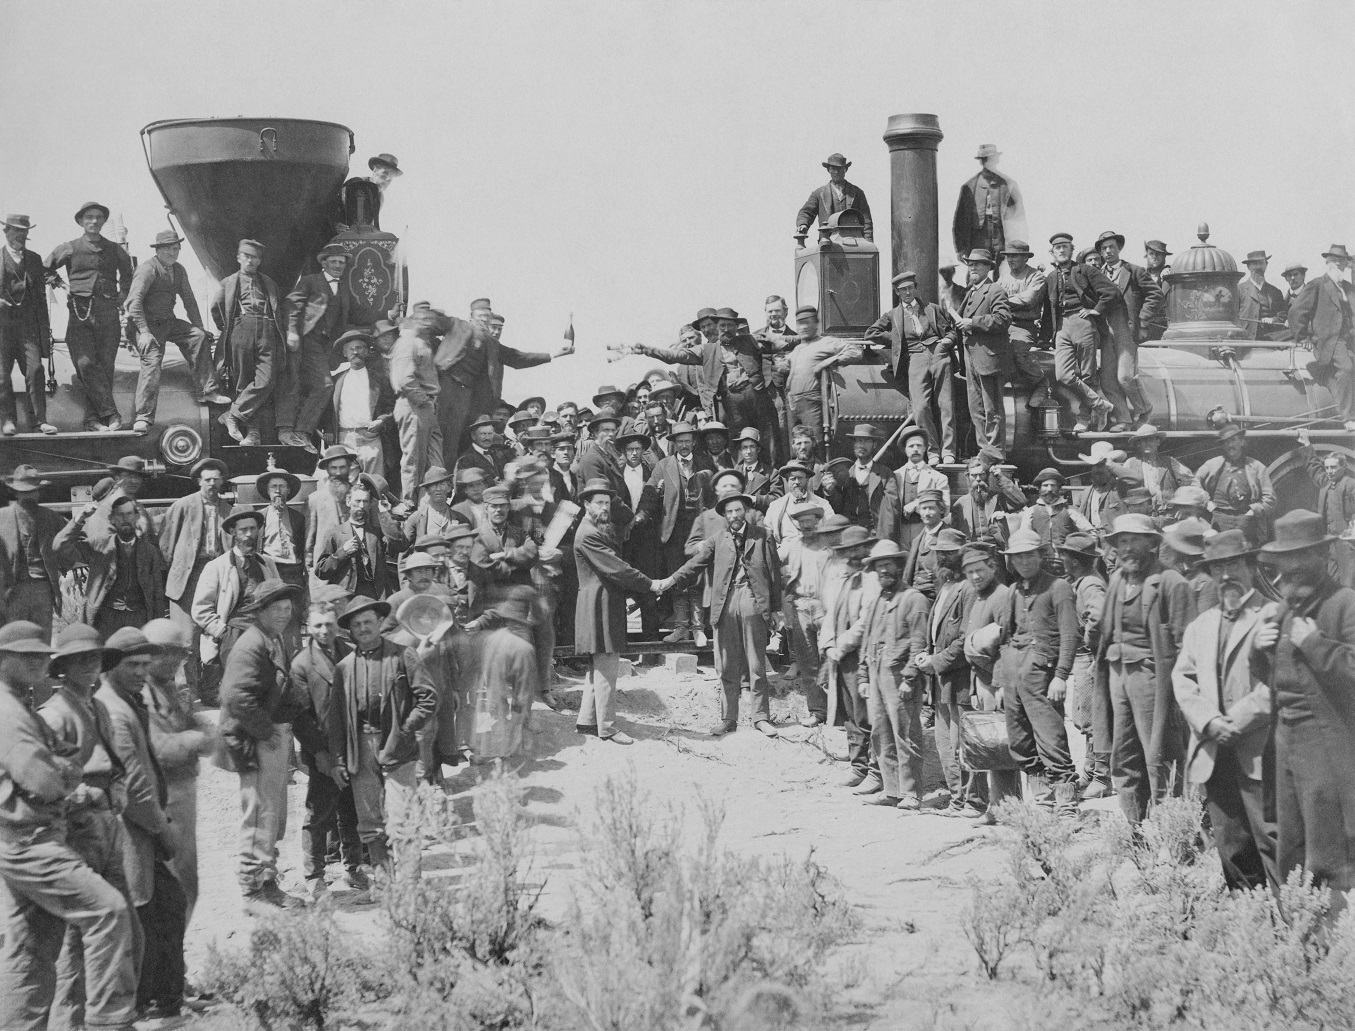 The ceremony for the driving of the golden spike at Promontory Summit, Utah on May 10, 1869; completion of the First Transcontinental Railroad